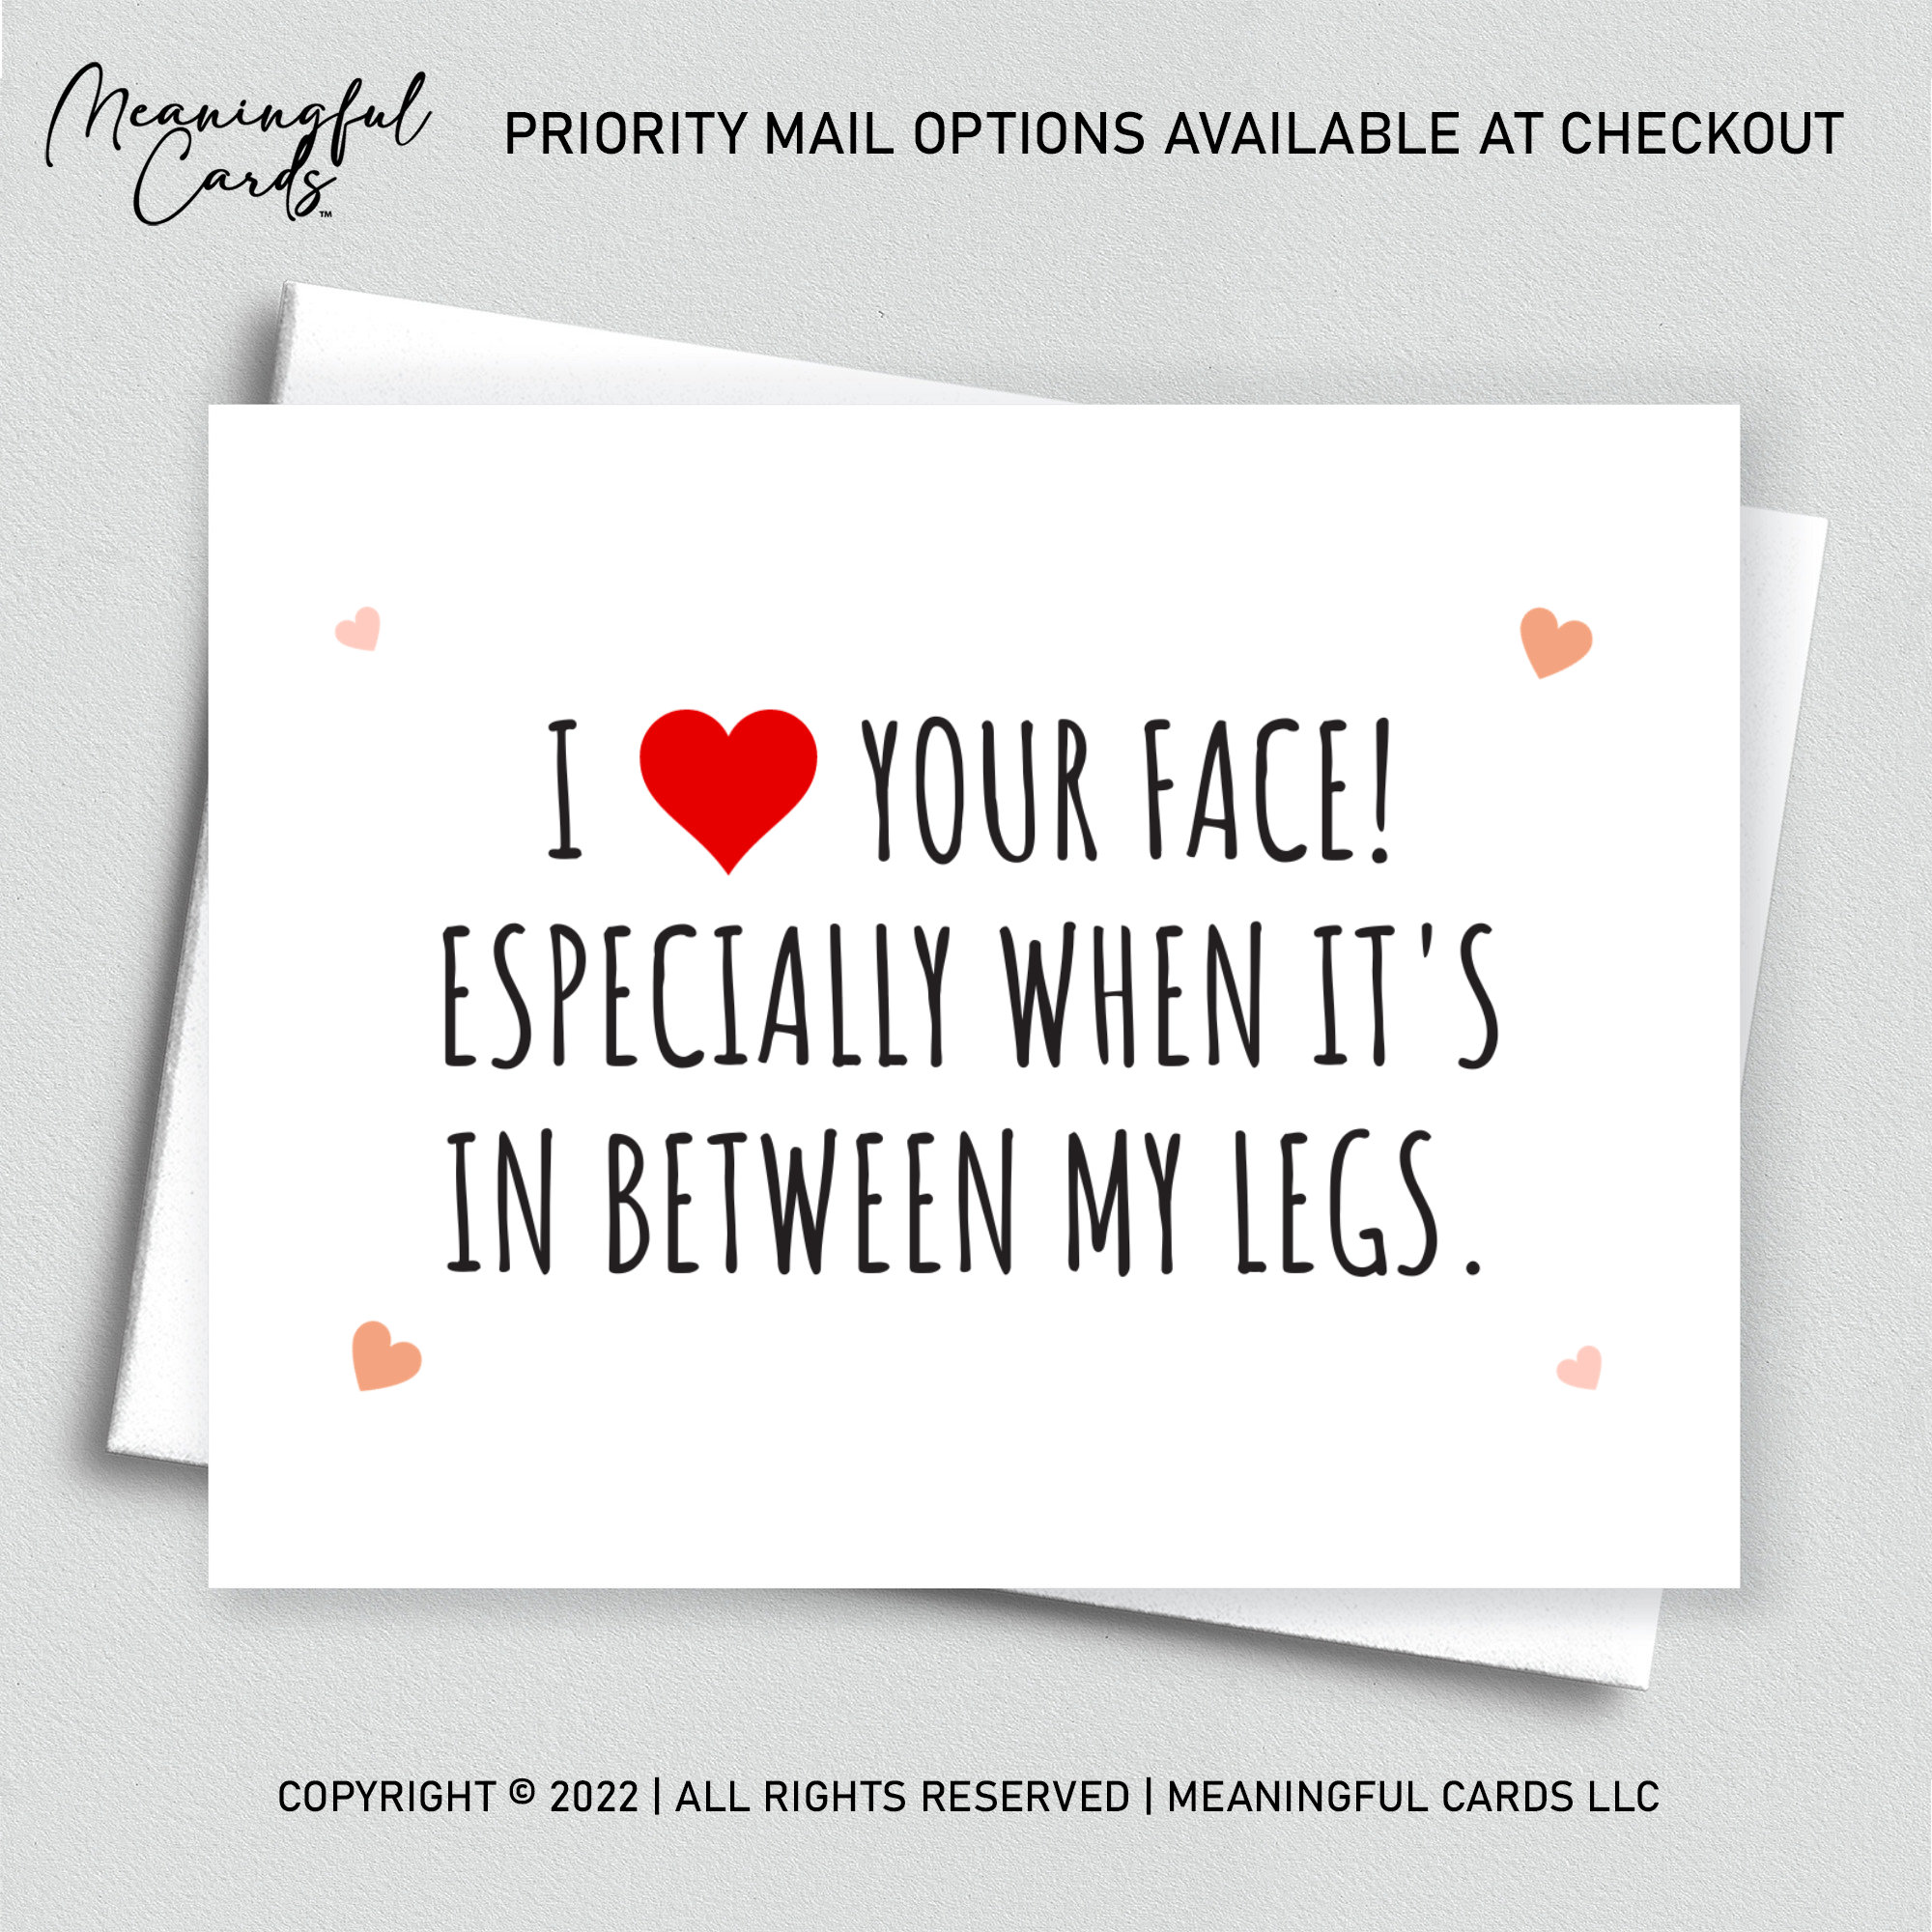 I Love Your Face Especially When It's In Between My Legs Greeting Card -  UntamedEgo LLC.